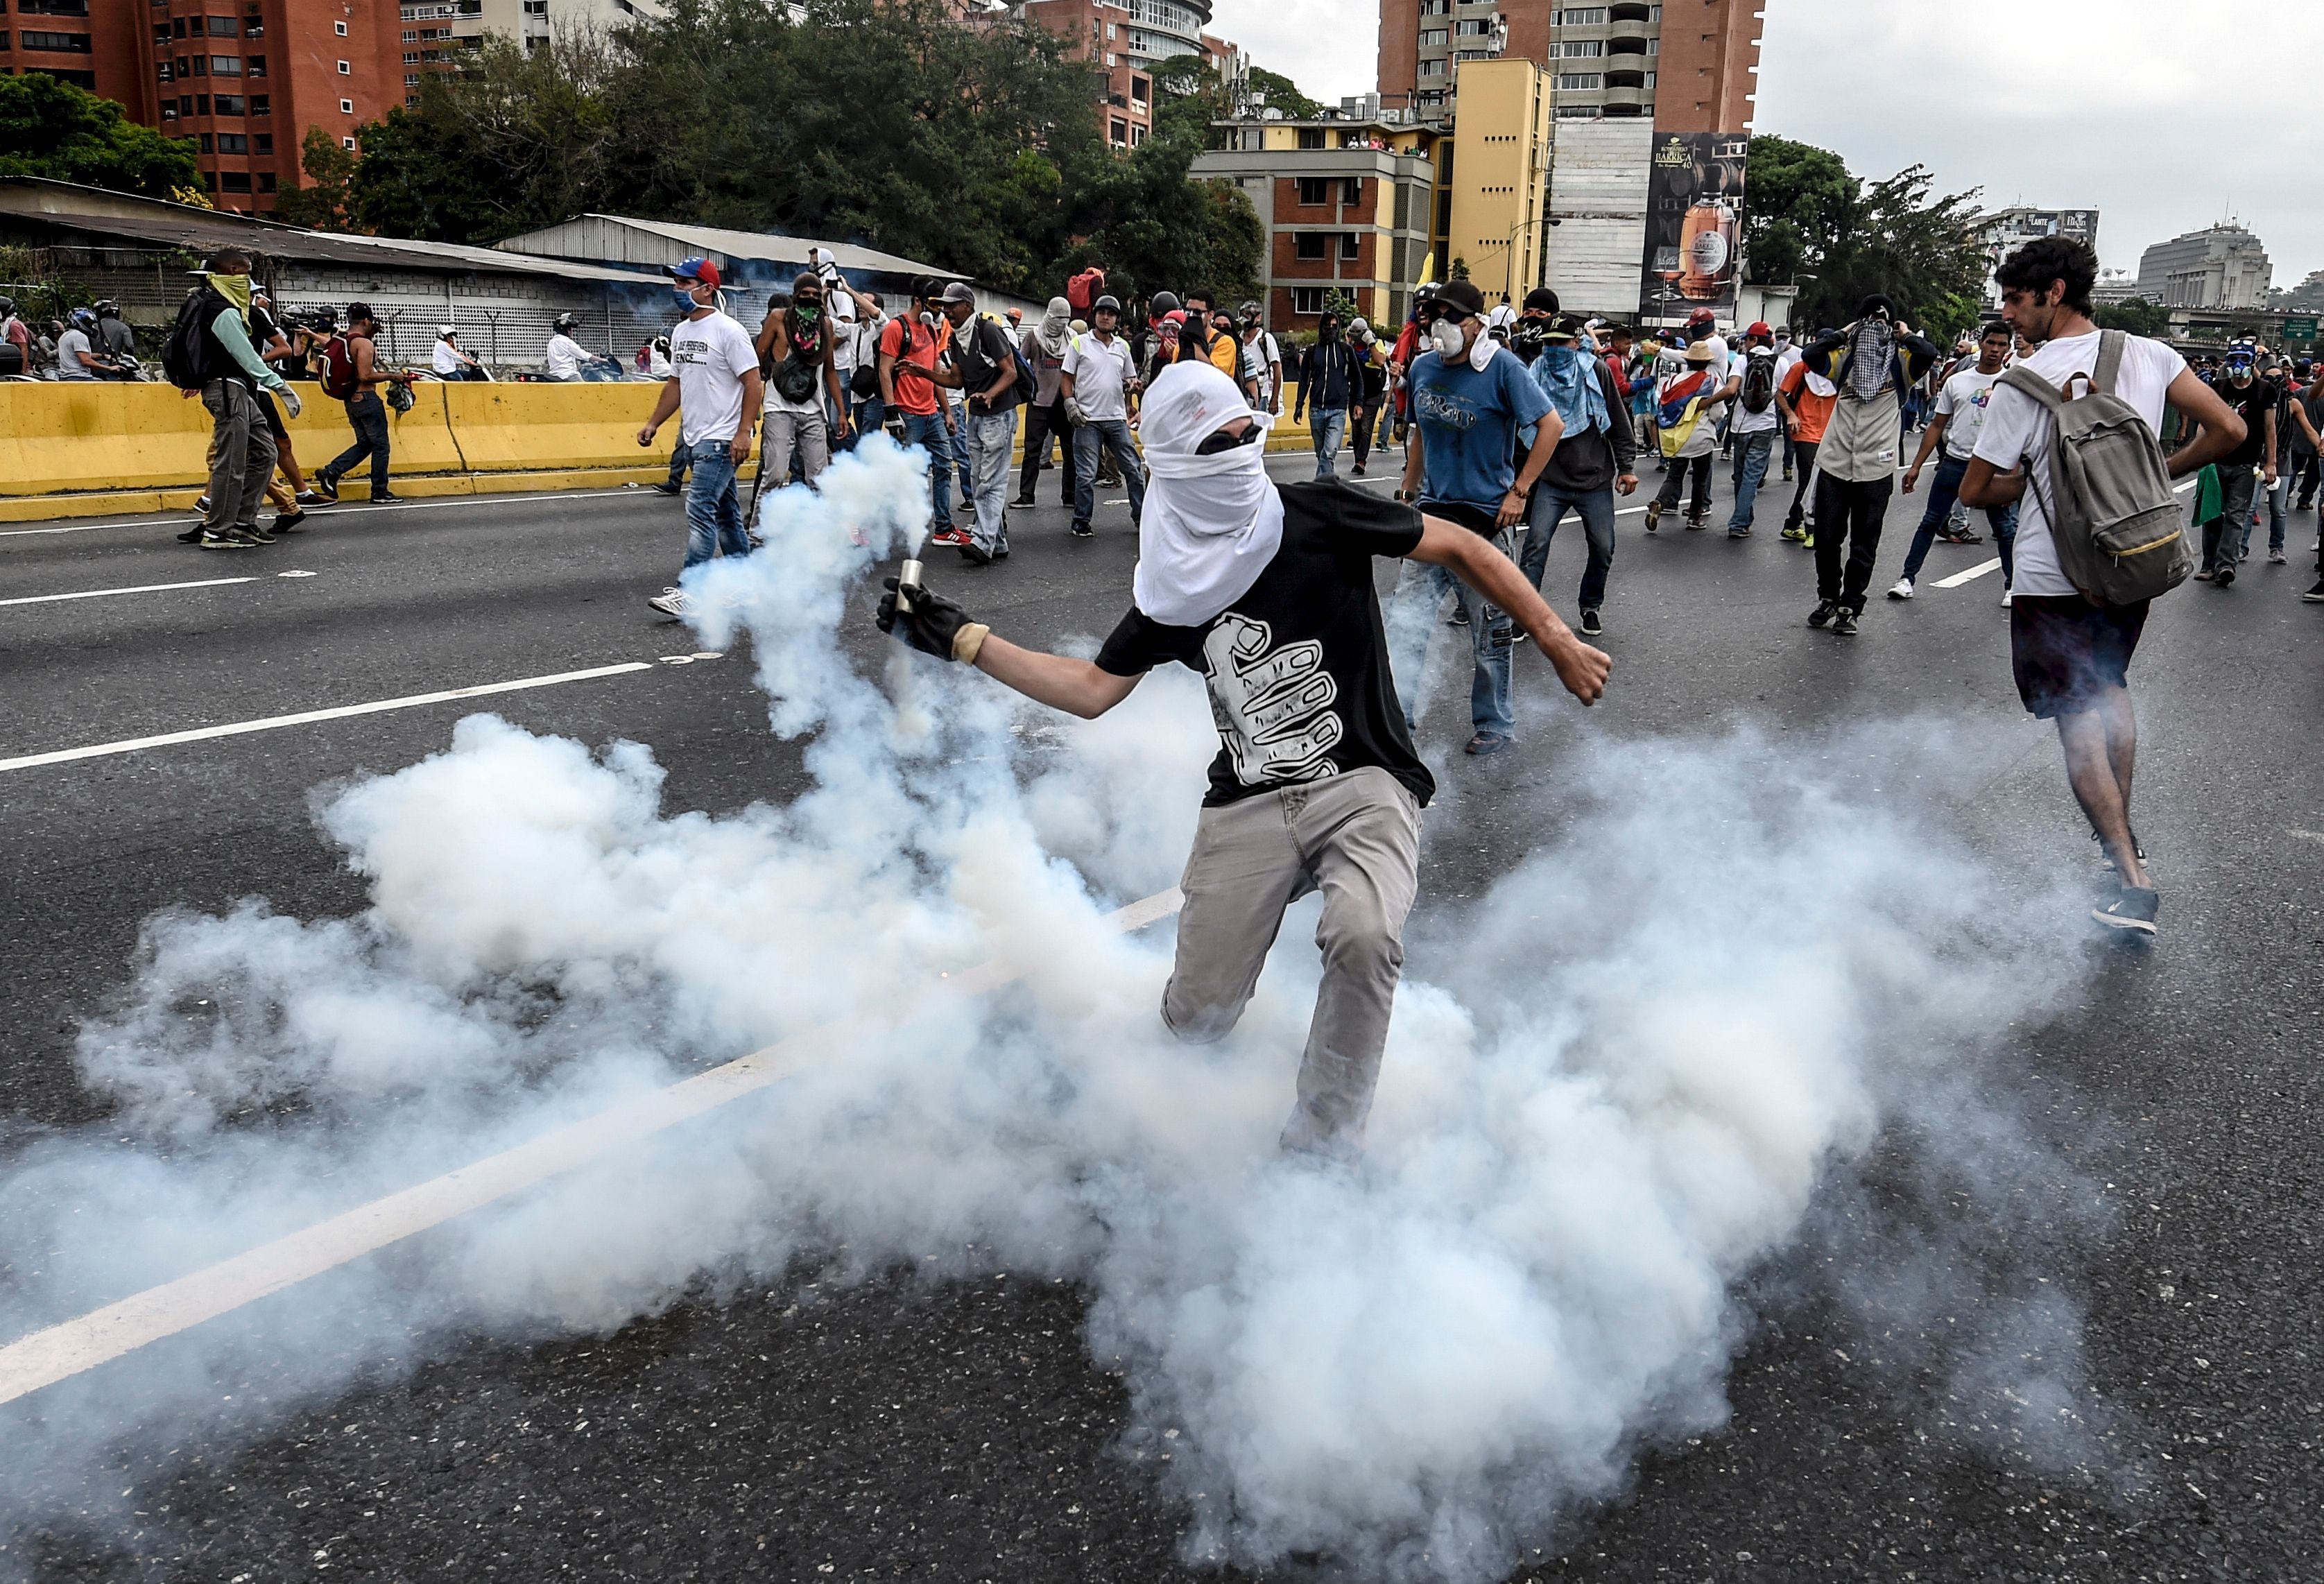 Demonstrators clash with the riot police during a protest against Venezuelan President Nicolas Maduro, in Caracas on April 20, 2017. (Juan Barreto—AFP/Getty Images)